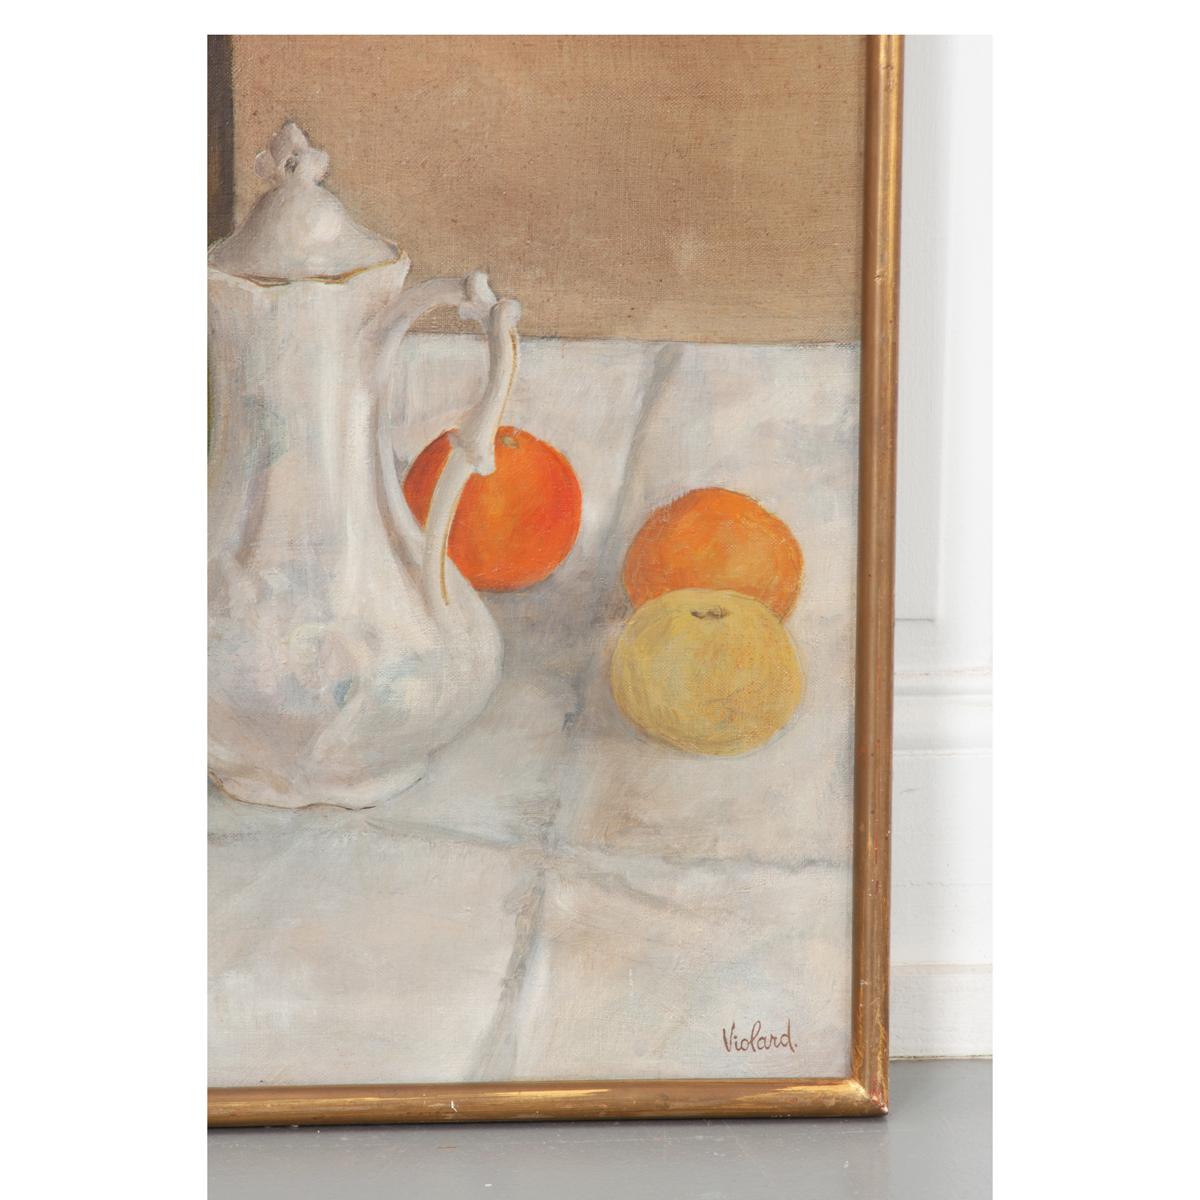 This is a delightful still life oil on canvas painting depicts a French kitchen. A glass storage jar, white sugar and cream containers, and fruit sit easily on the white tile counter. The slim gold gilt frame has a charming patina that pairs nicely